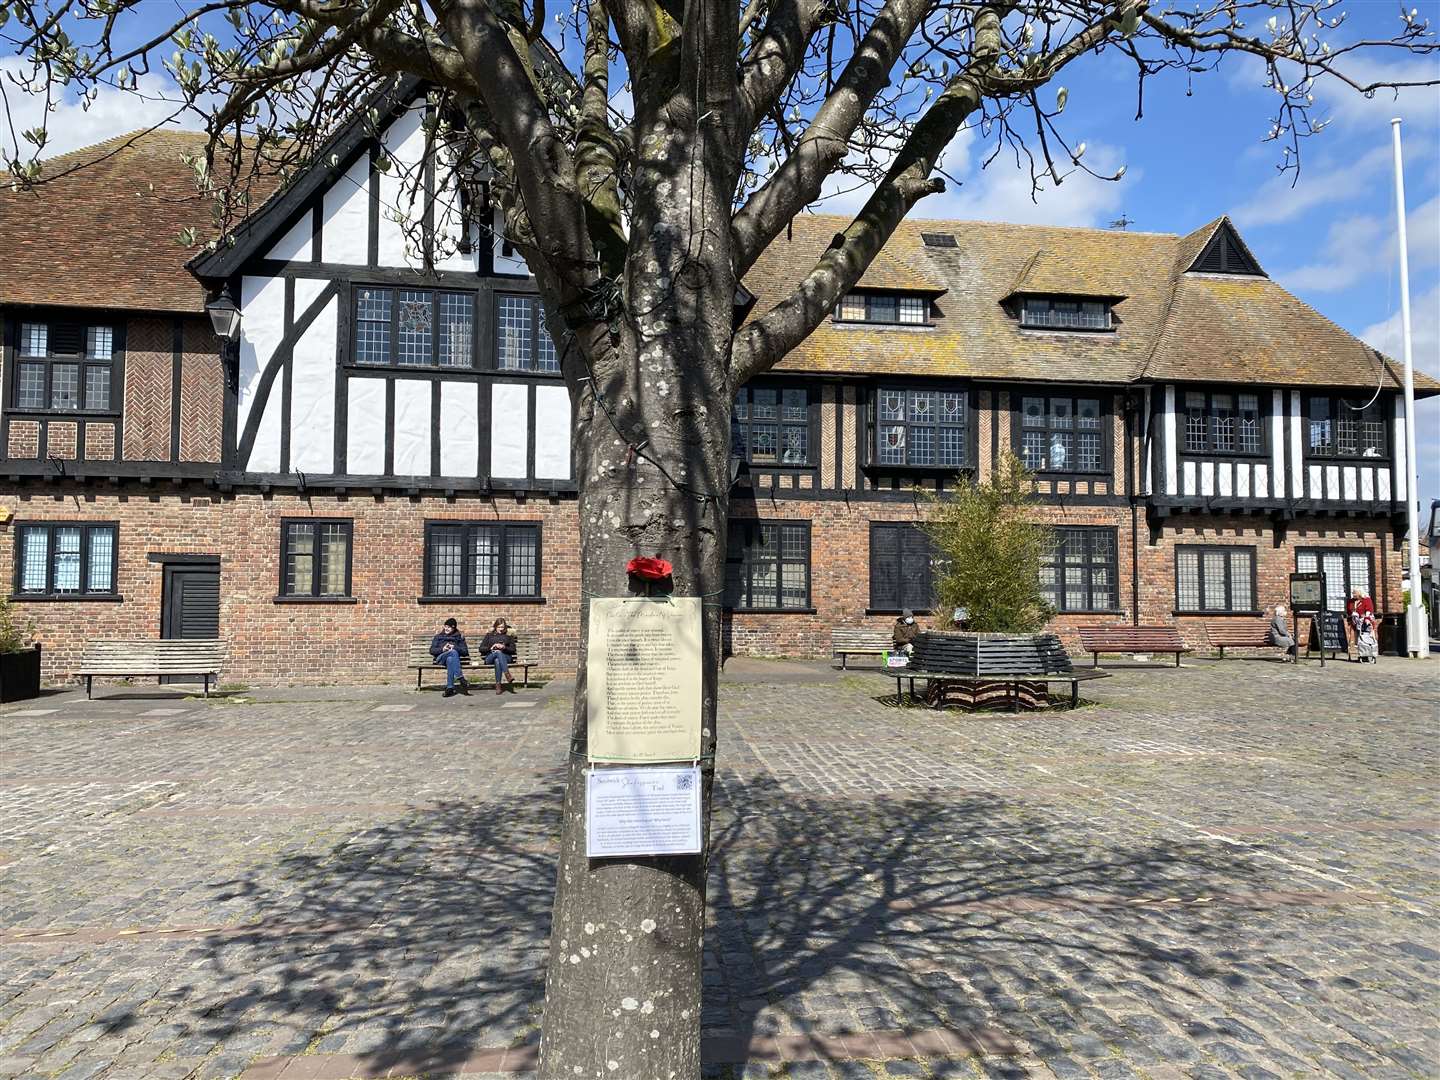 The Shakespeare Trail was put up around Sandwich on The Bard's birthday, April 23. (46837155)